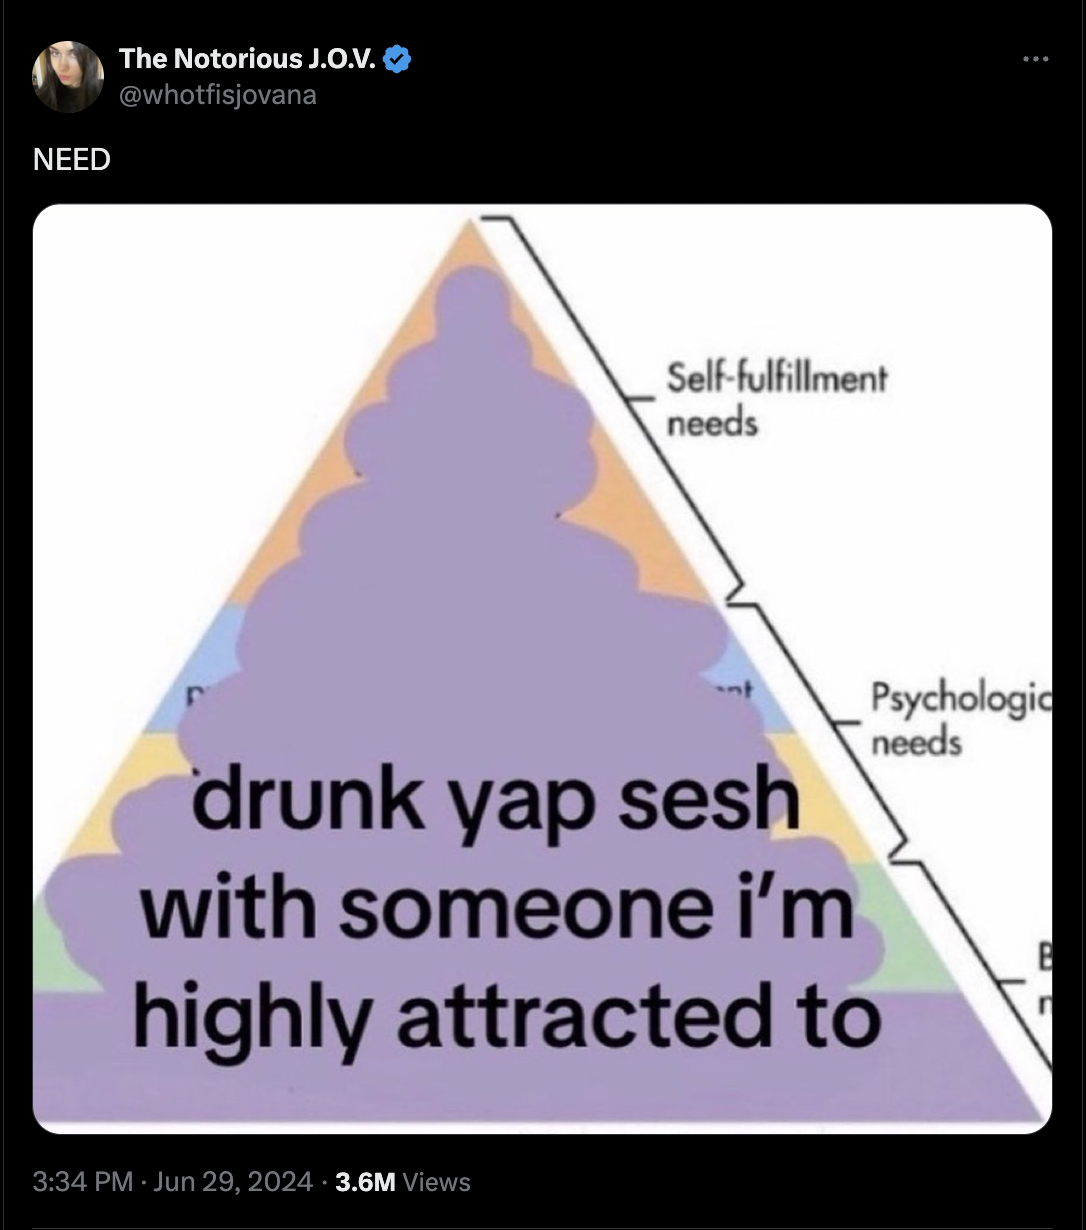 triangle - Need The Notorious J.O.V. Selffulfillment needs drunk yap sesh with someone i'm highly attracted to 3.6M Views Psychologic needs